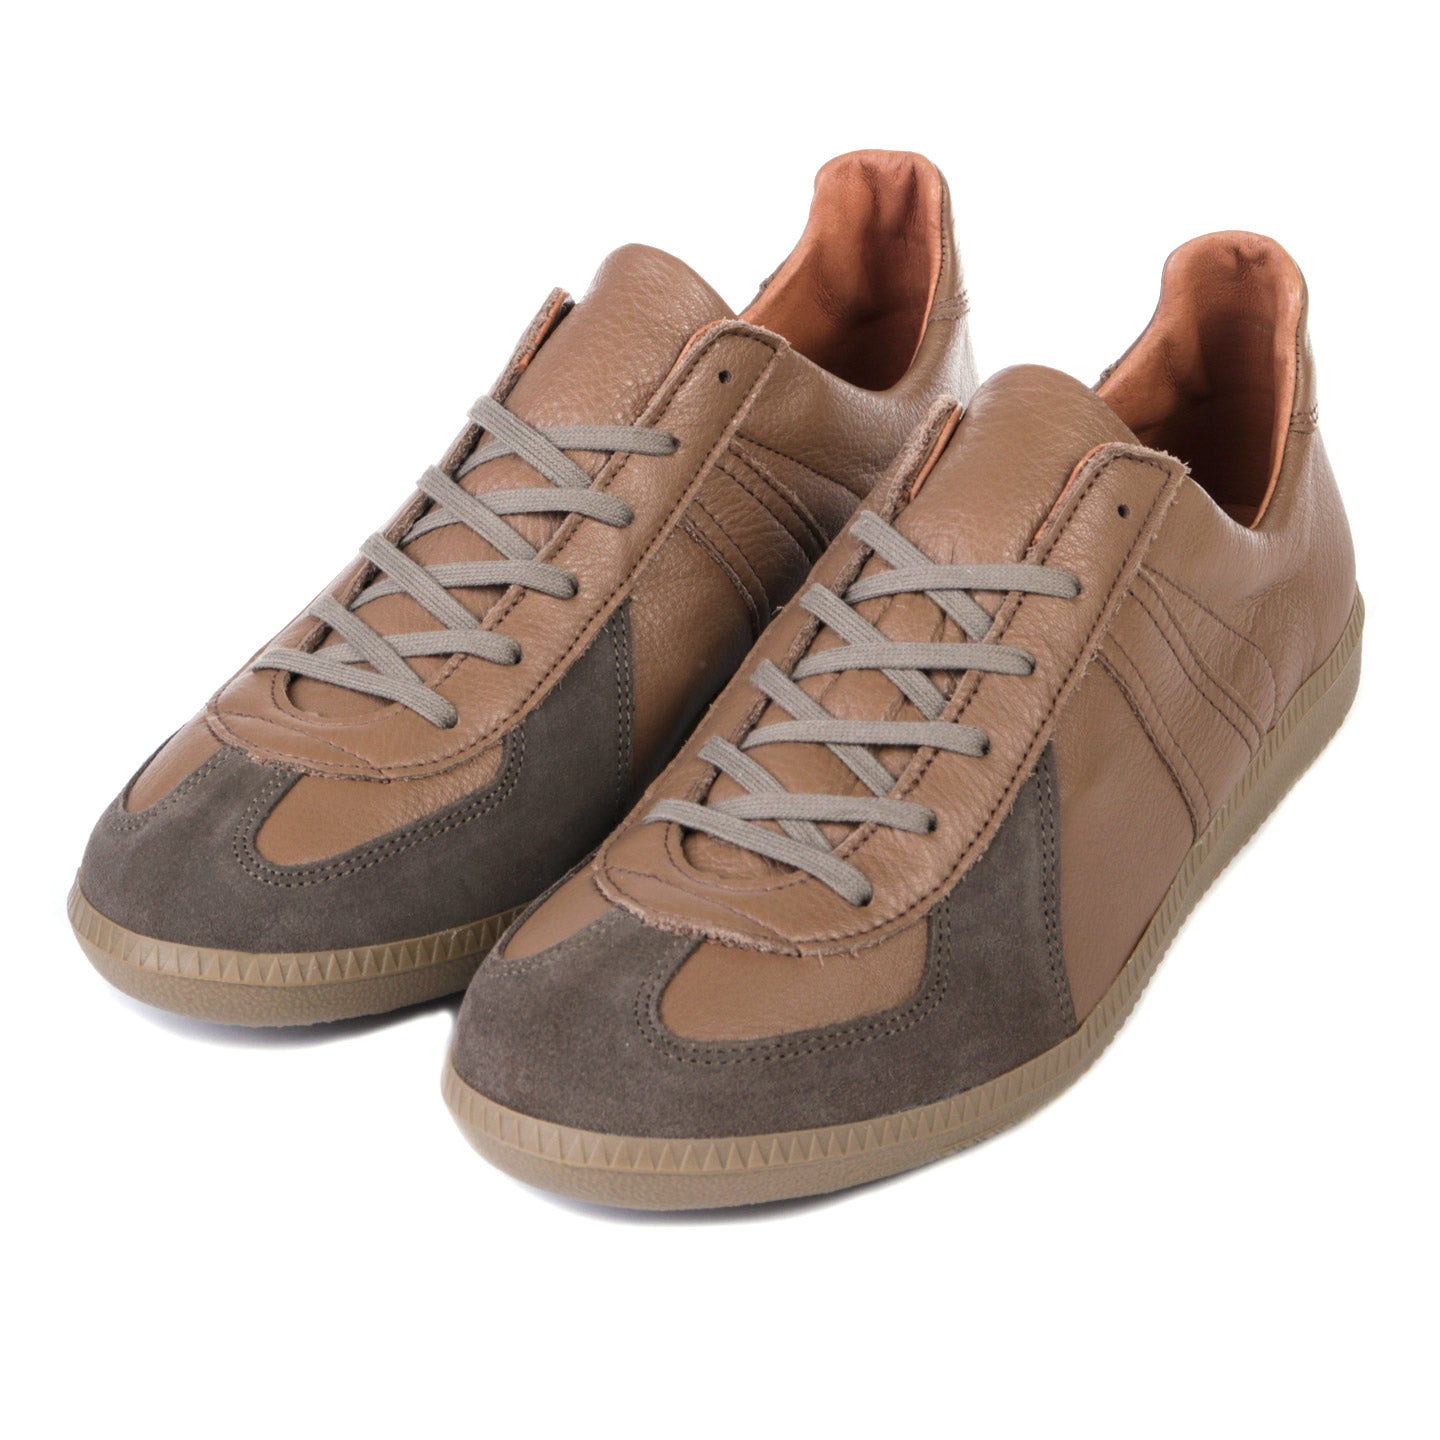 REPRODUCTION OF FOUND GERMAN MILITARY TRAINER DARK BEIGE